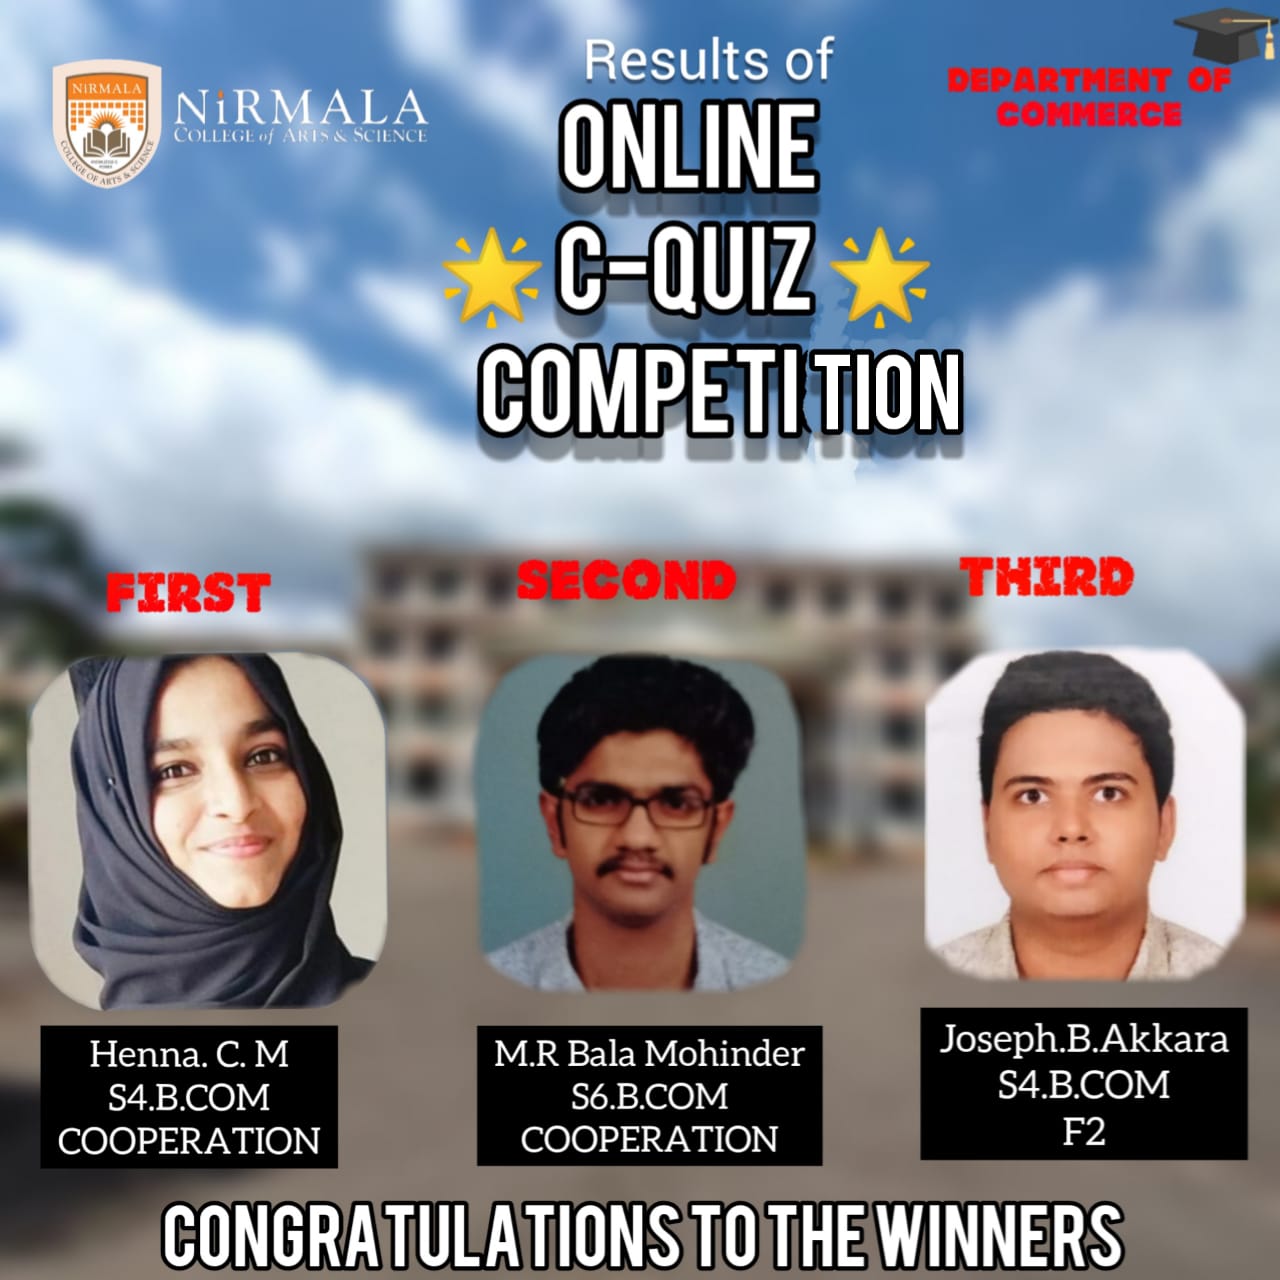 Hearty congratulations to the winners.